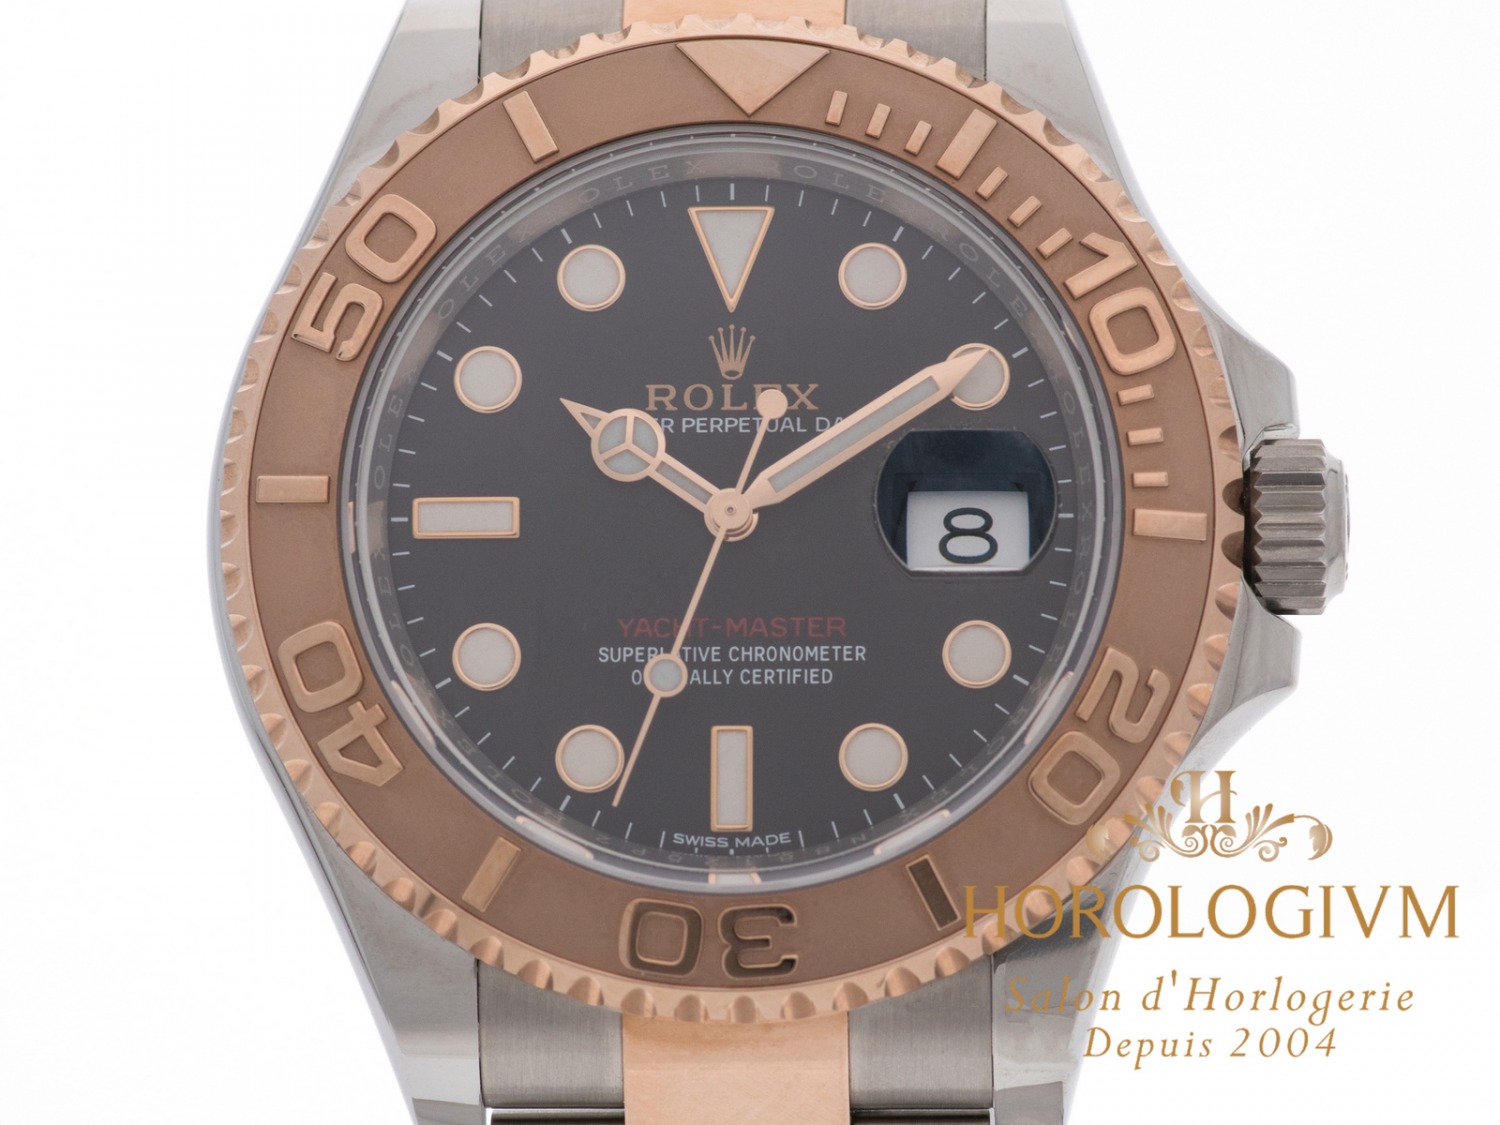 Rolex Yacht-Master TwoTone Ref. 116621 watch, two - tone (bi - colored) silver (case) and rose gold (bezel)